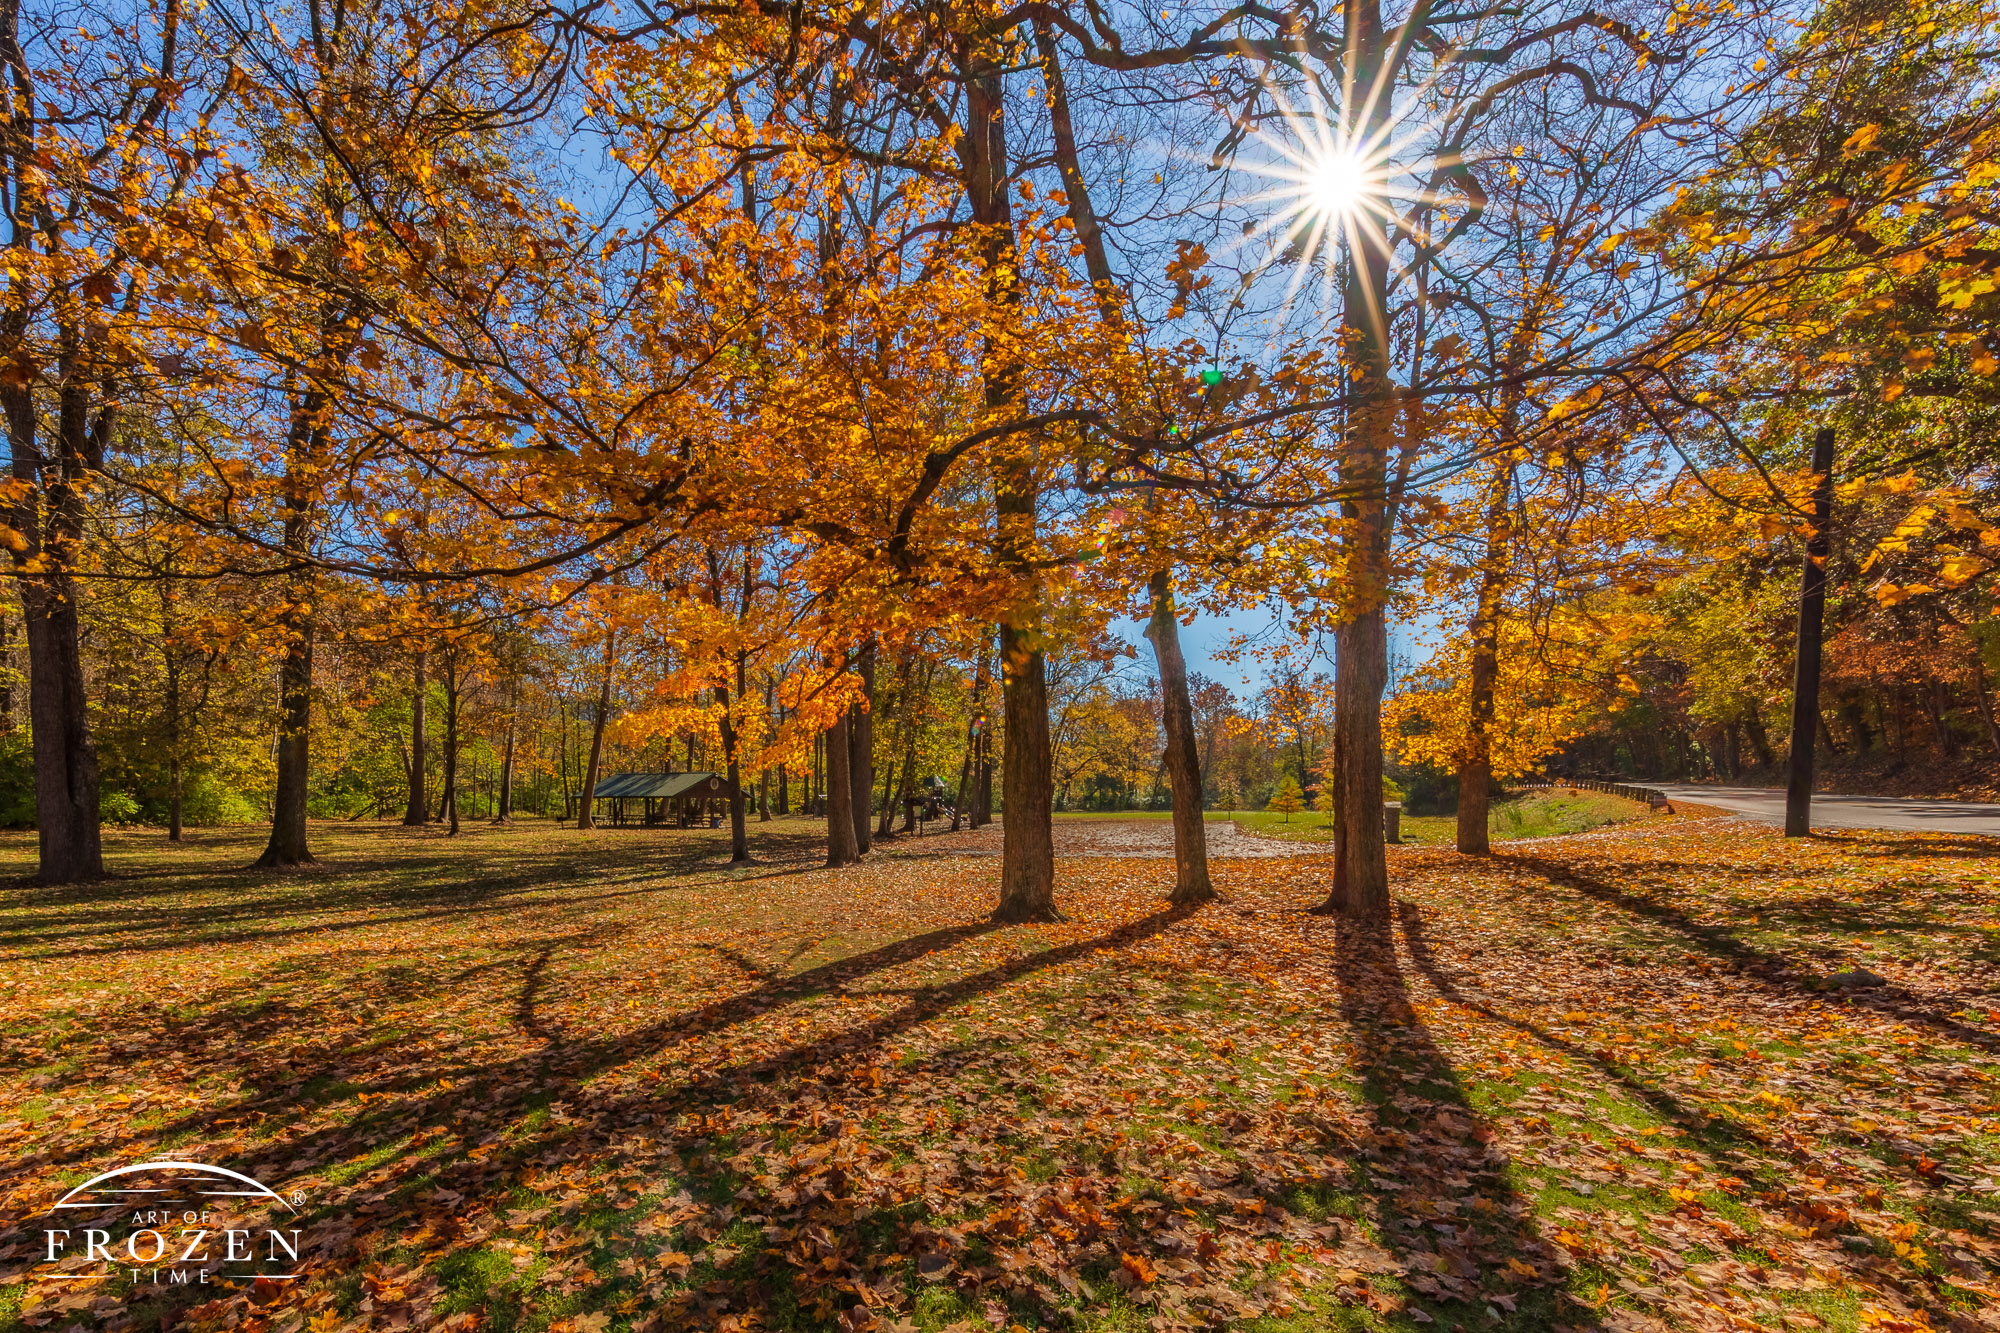 A small playground park in Bellbrook Ohio where the sun backlights the mature trees displaying their rich fall color